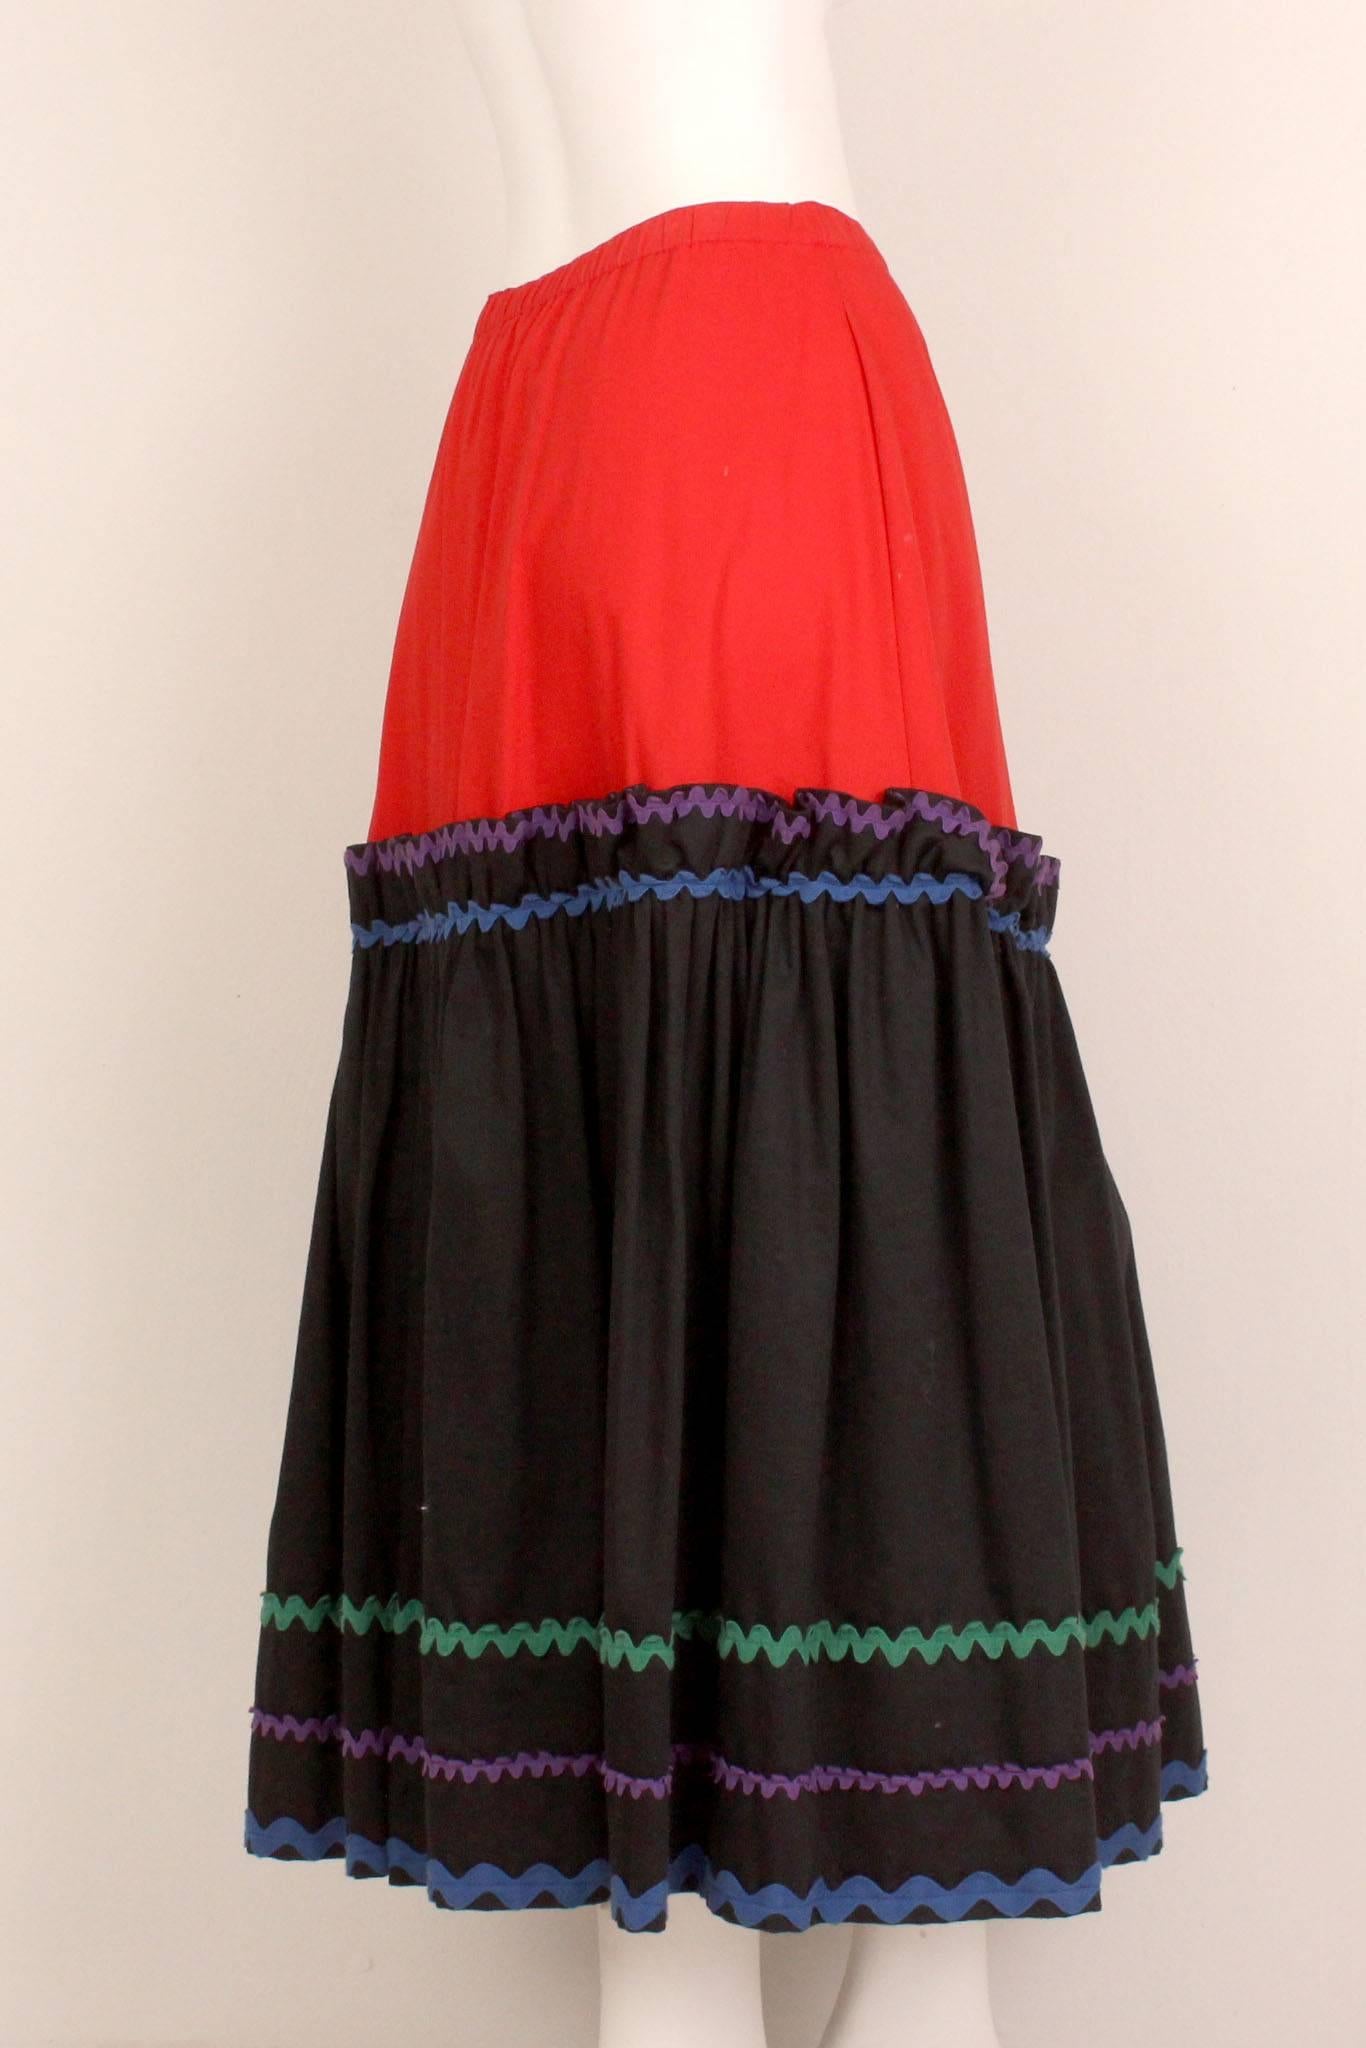 1970s Yves Saint Laurent Tiered Peasant Skirt In Excellent Condition For Sale In New York, NY